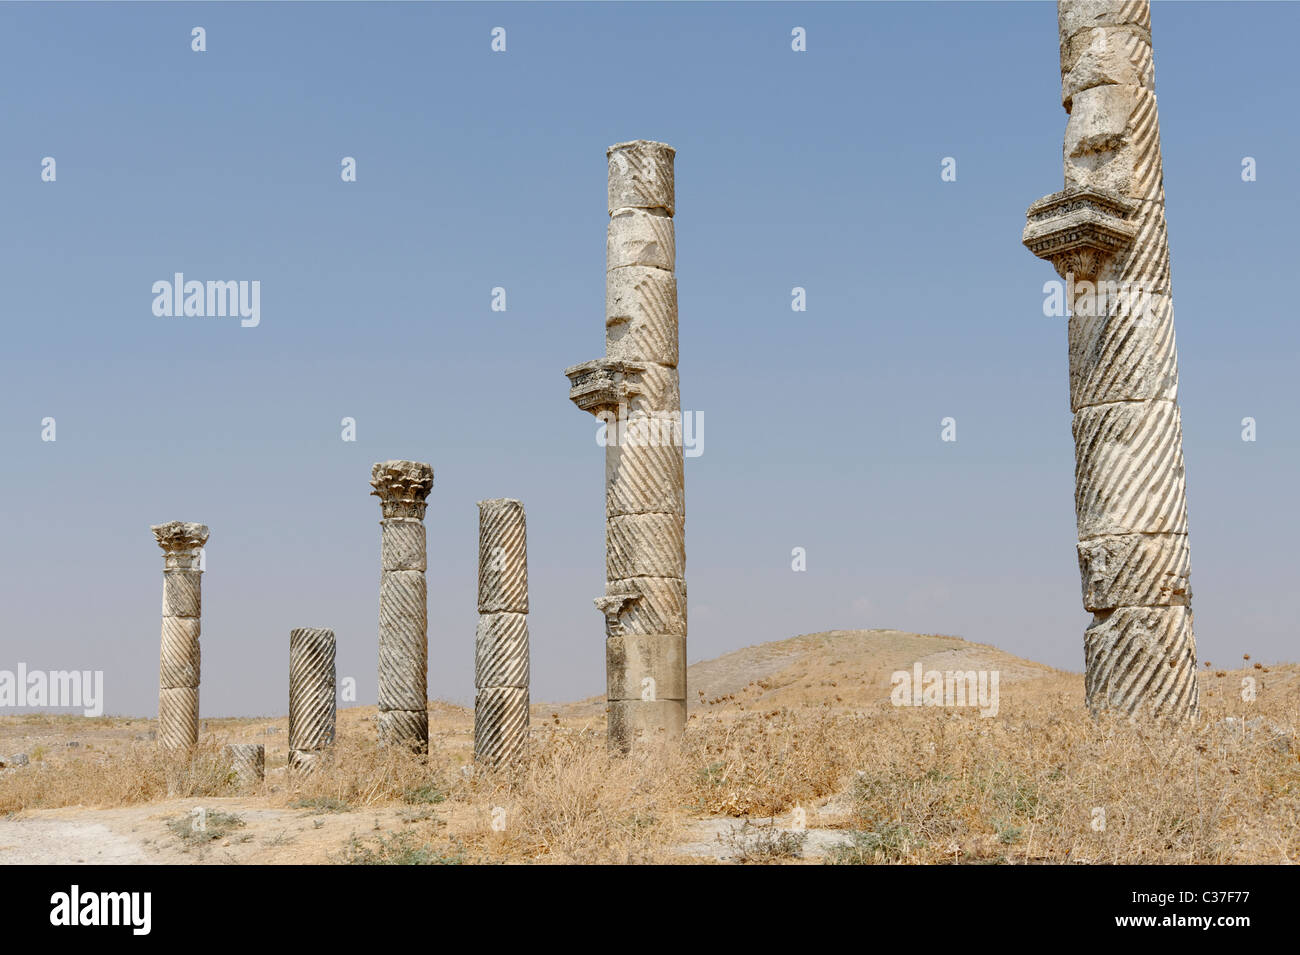 Columns along the Colonnaded Street marked with a deep twisting corkscrew fluting, unique to the ancient city of Apamea. Stock Photo